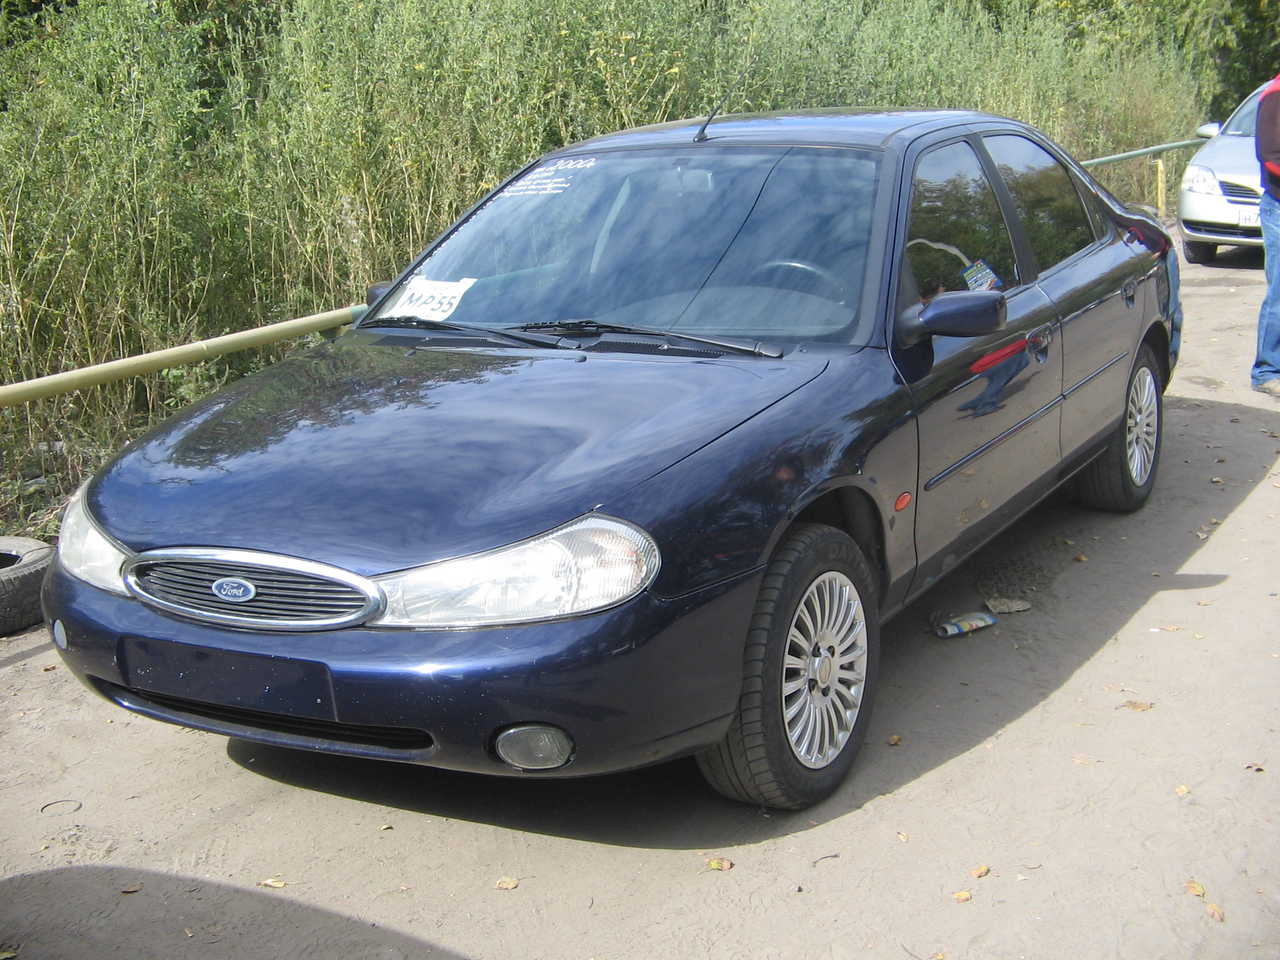 Ford mondeo 1999 review #5